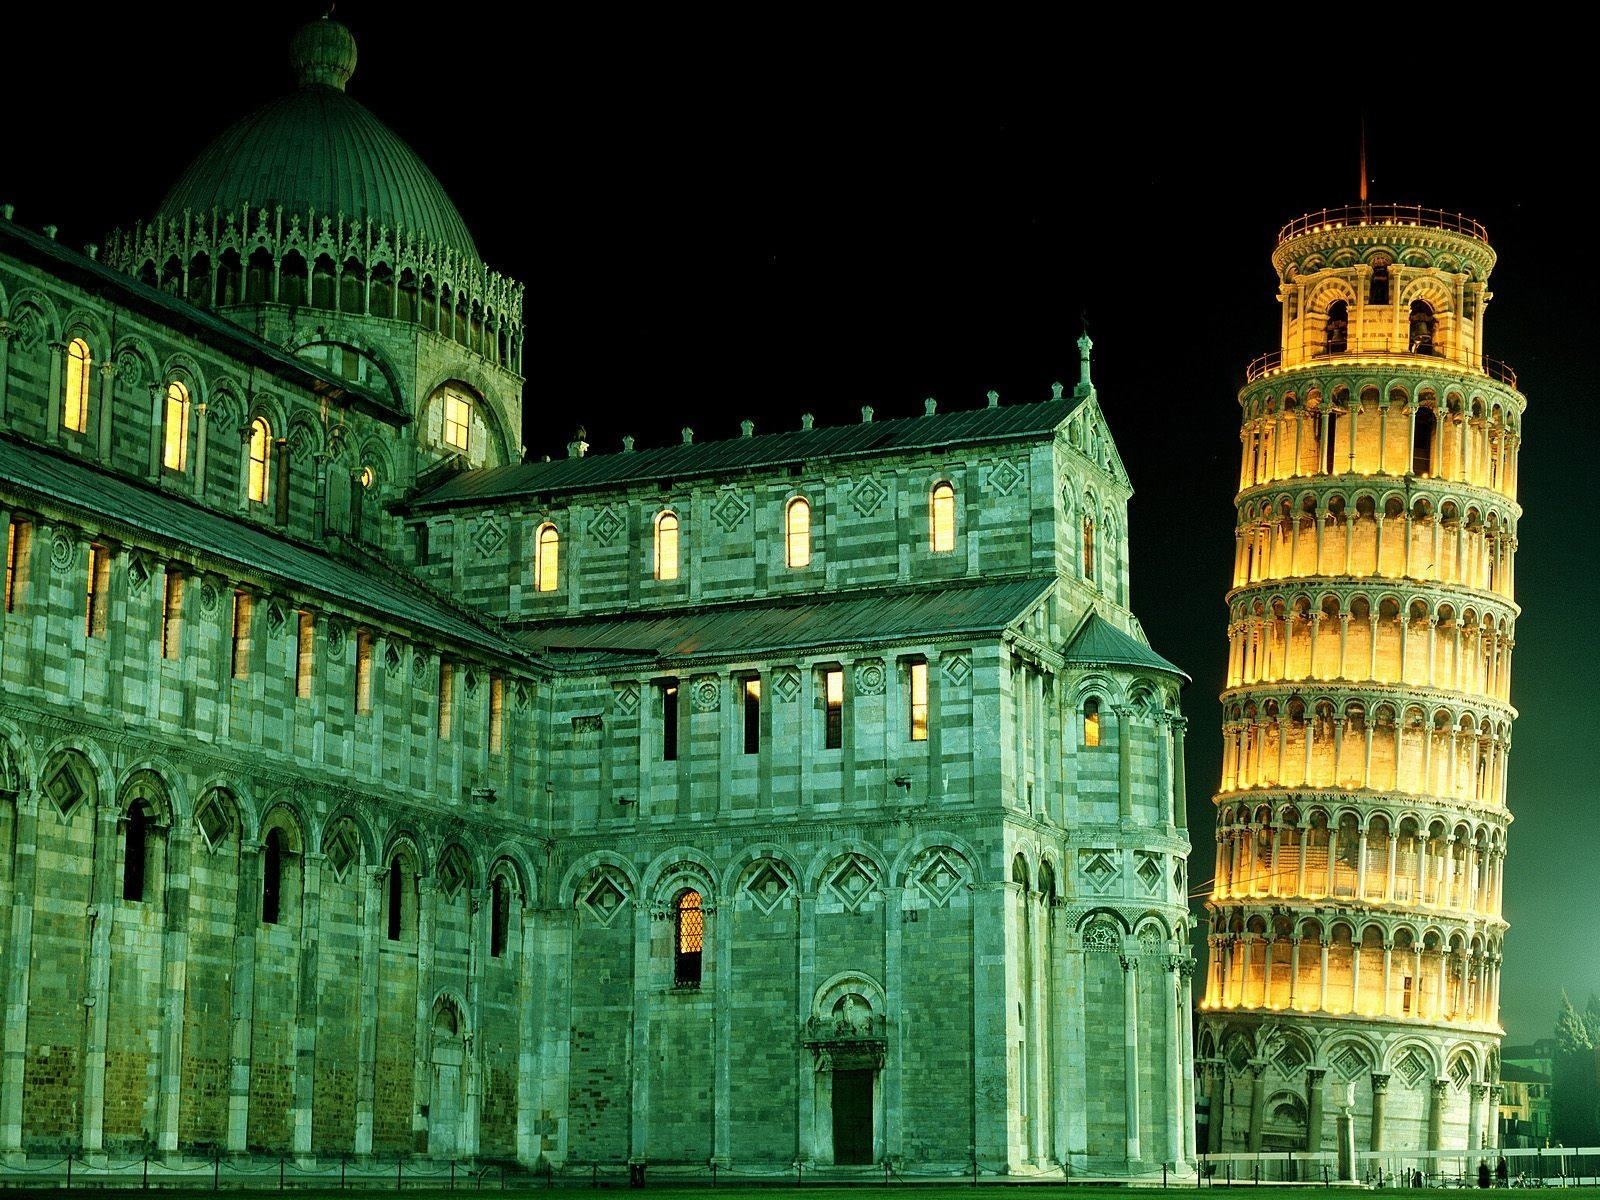 Popular Tower Of Pisa Image for Phone